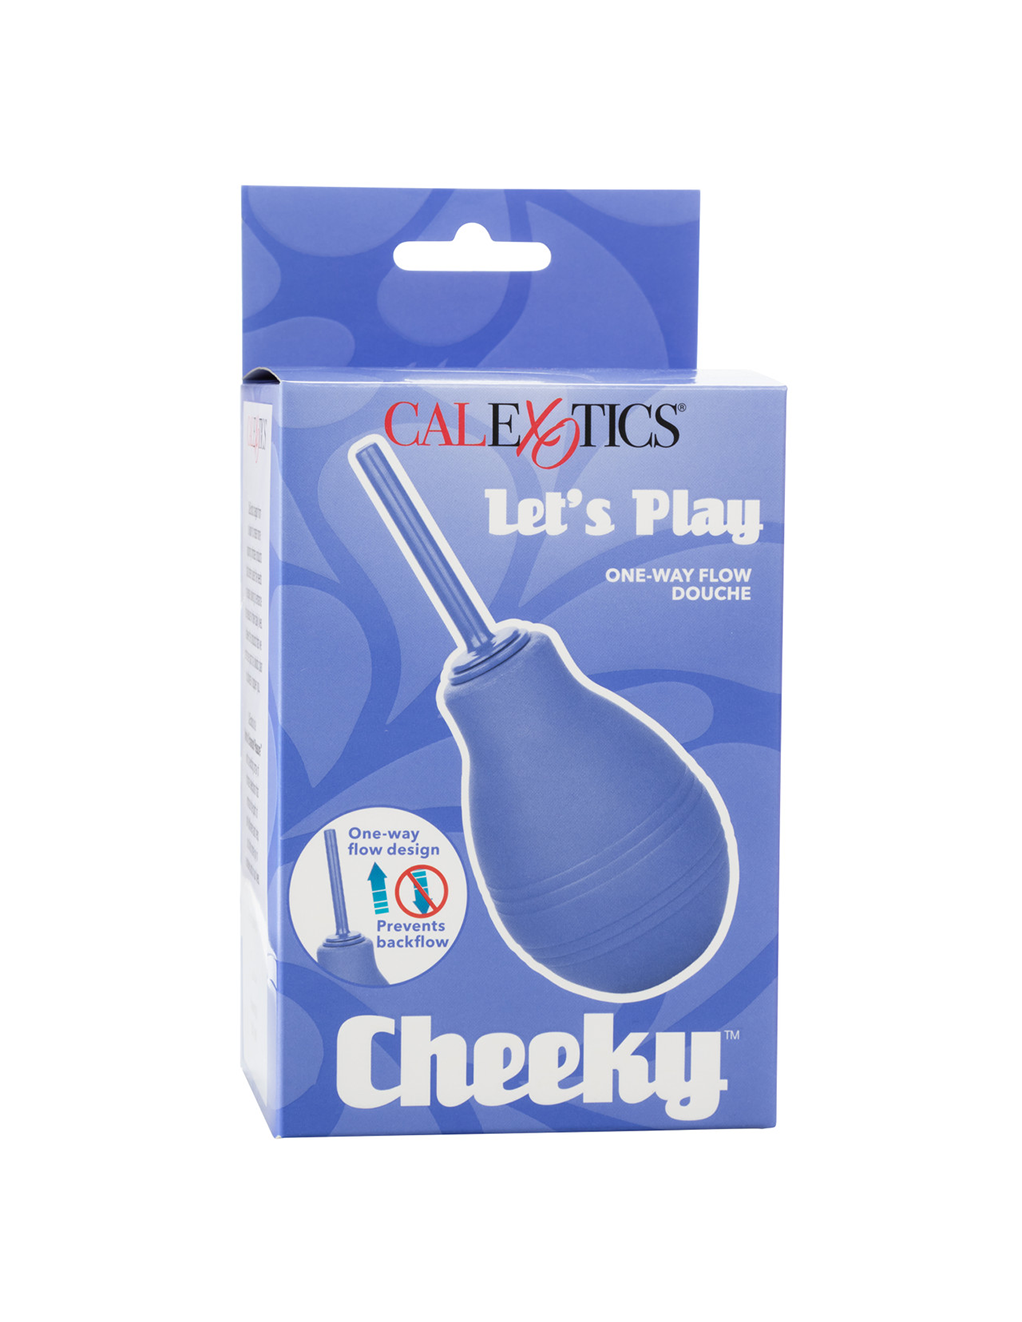 Cheeky™ One-Way Flow Douche - Blue